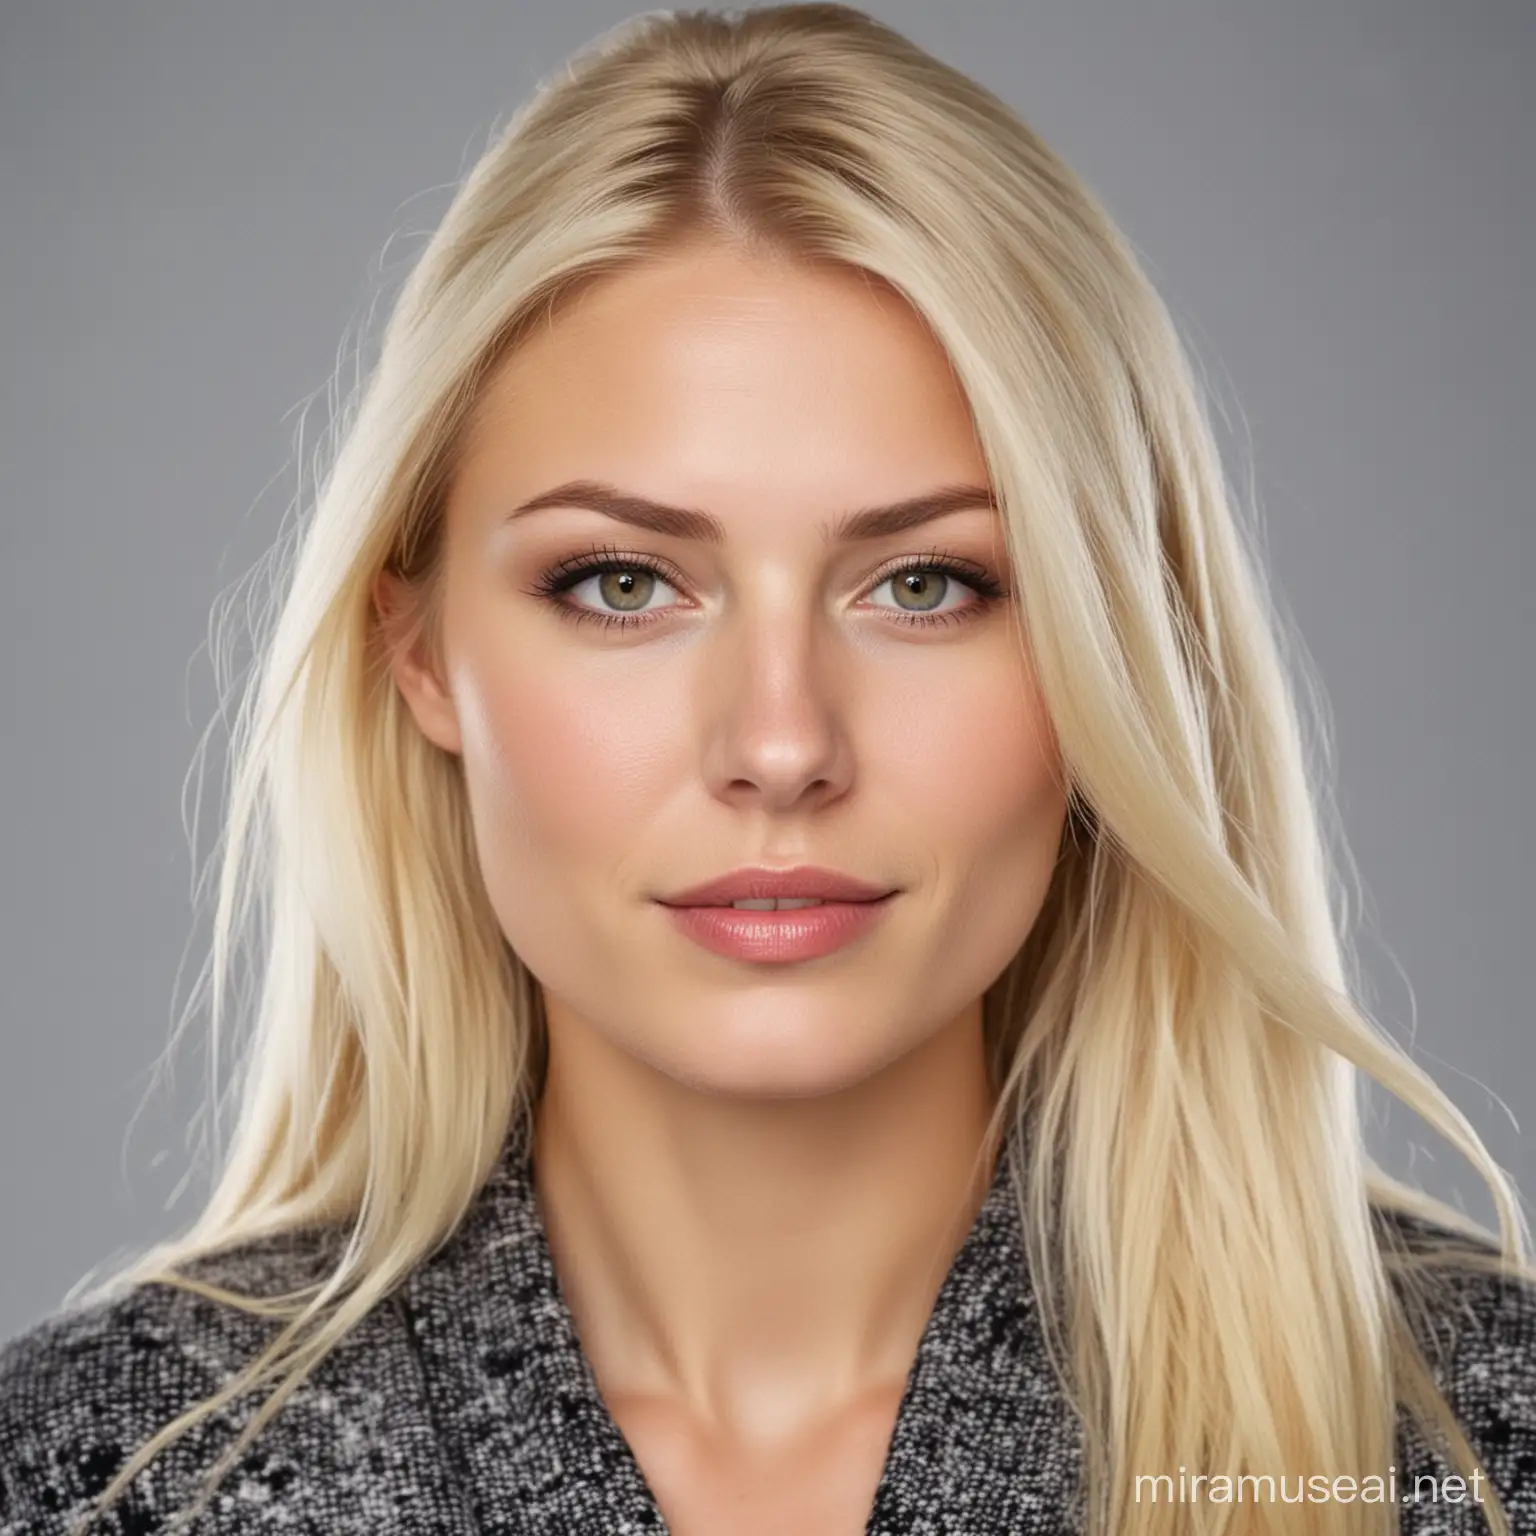 A blond nordic woman, attractive